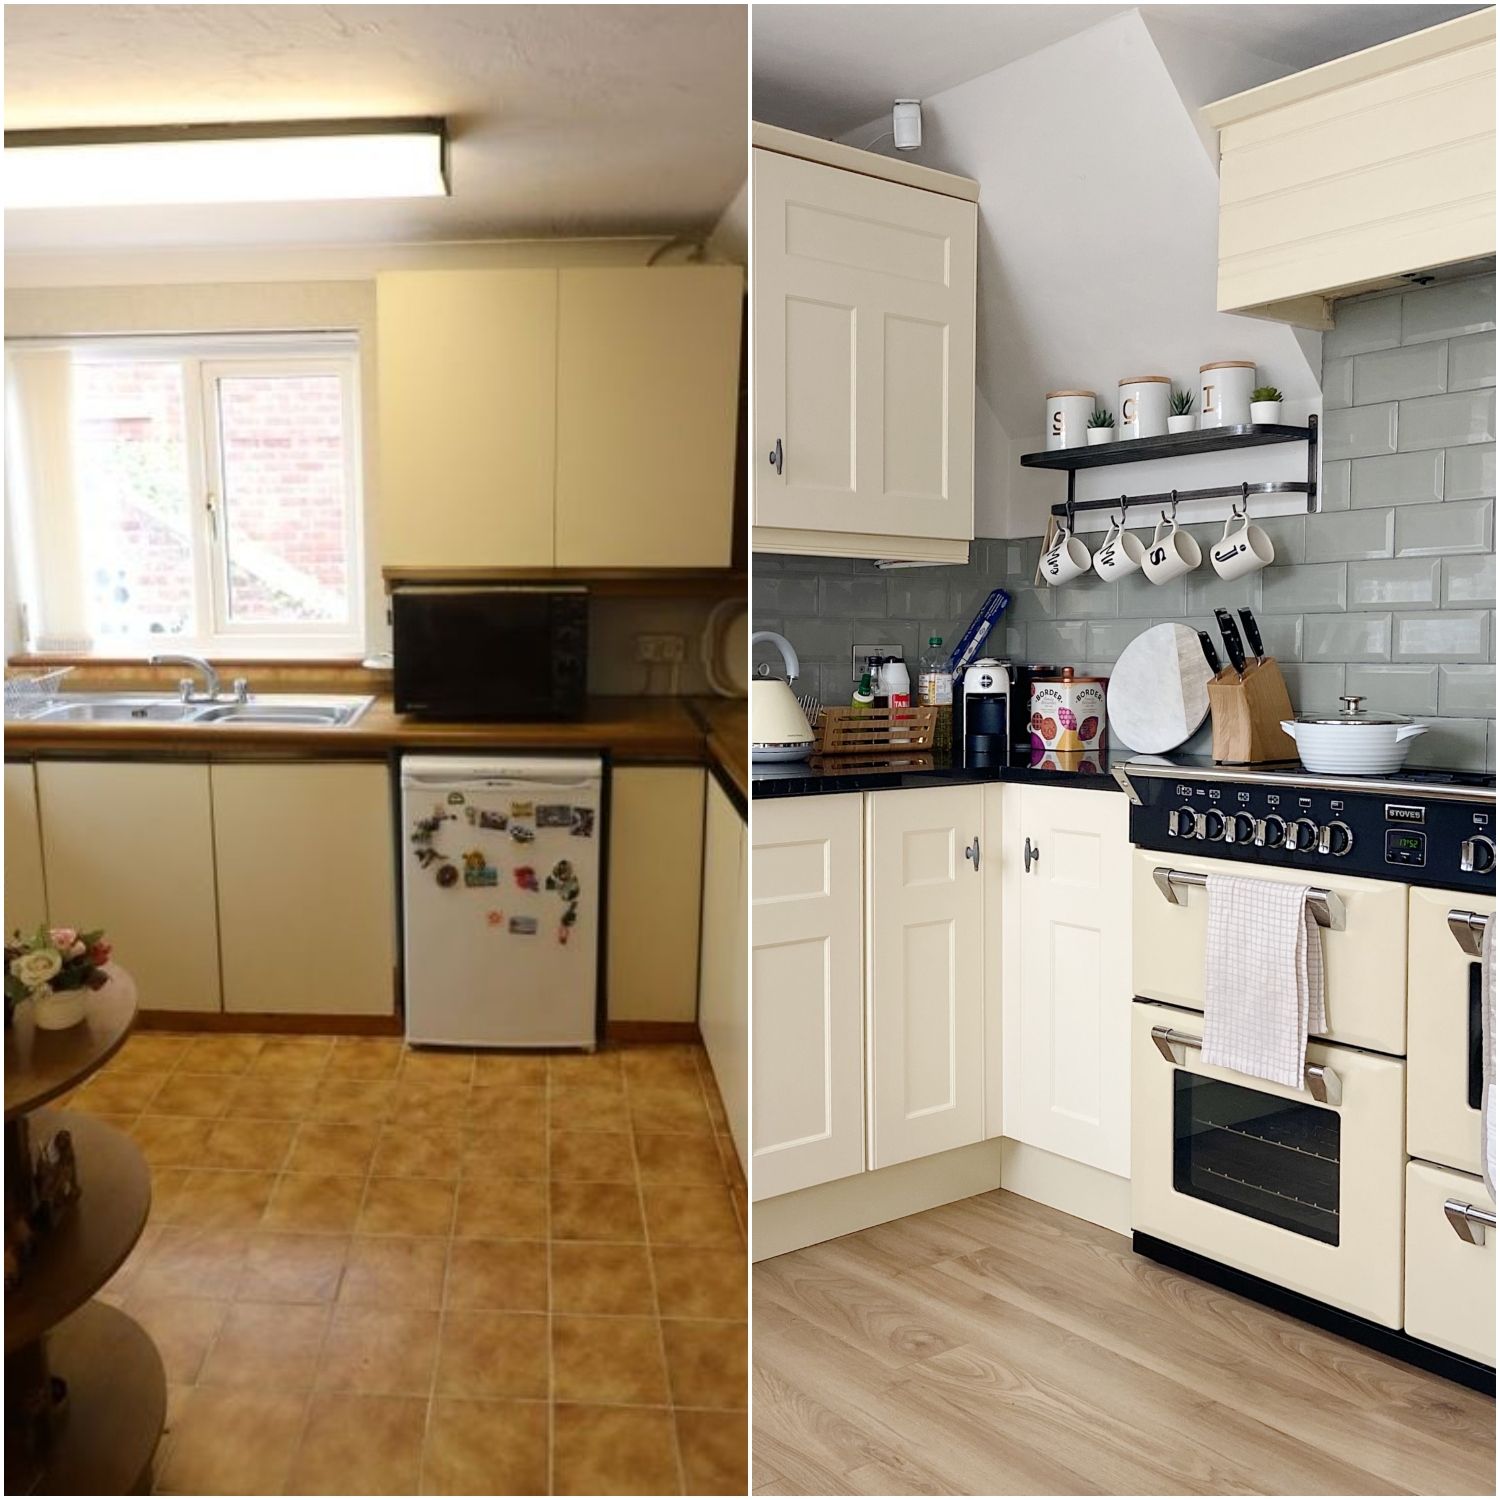 Before And After Images Kitchen Renovation 2 1610967324 